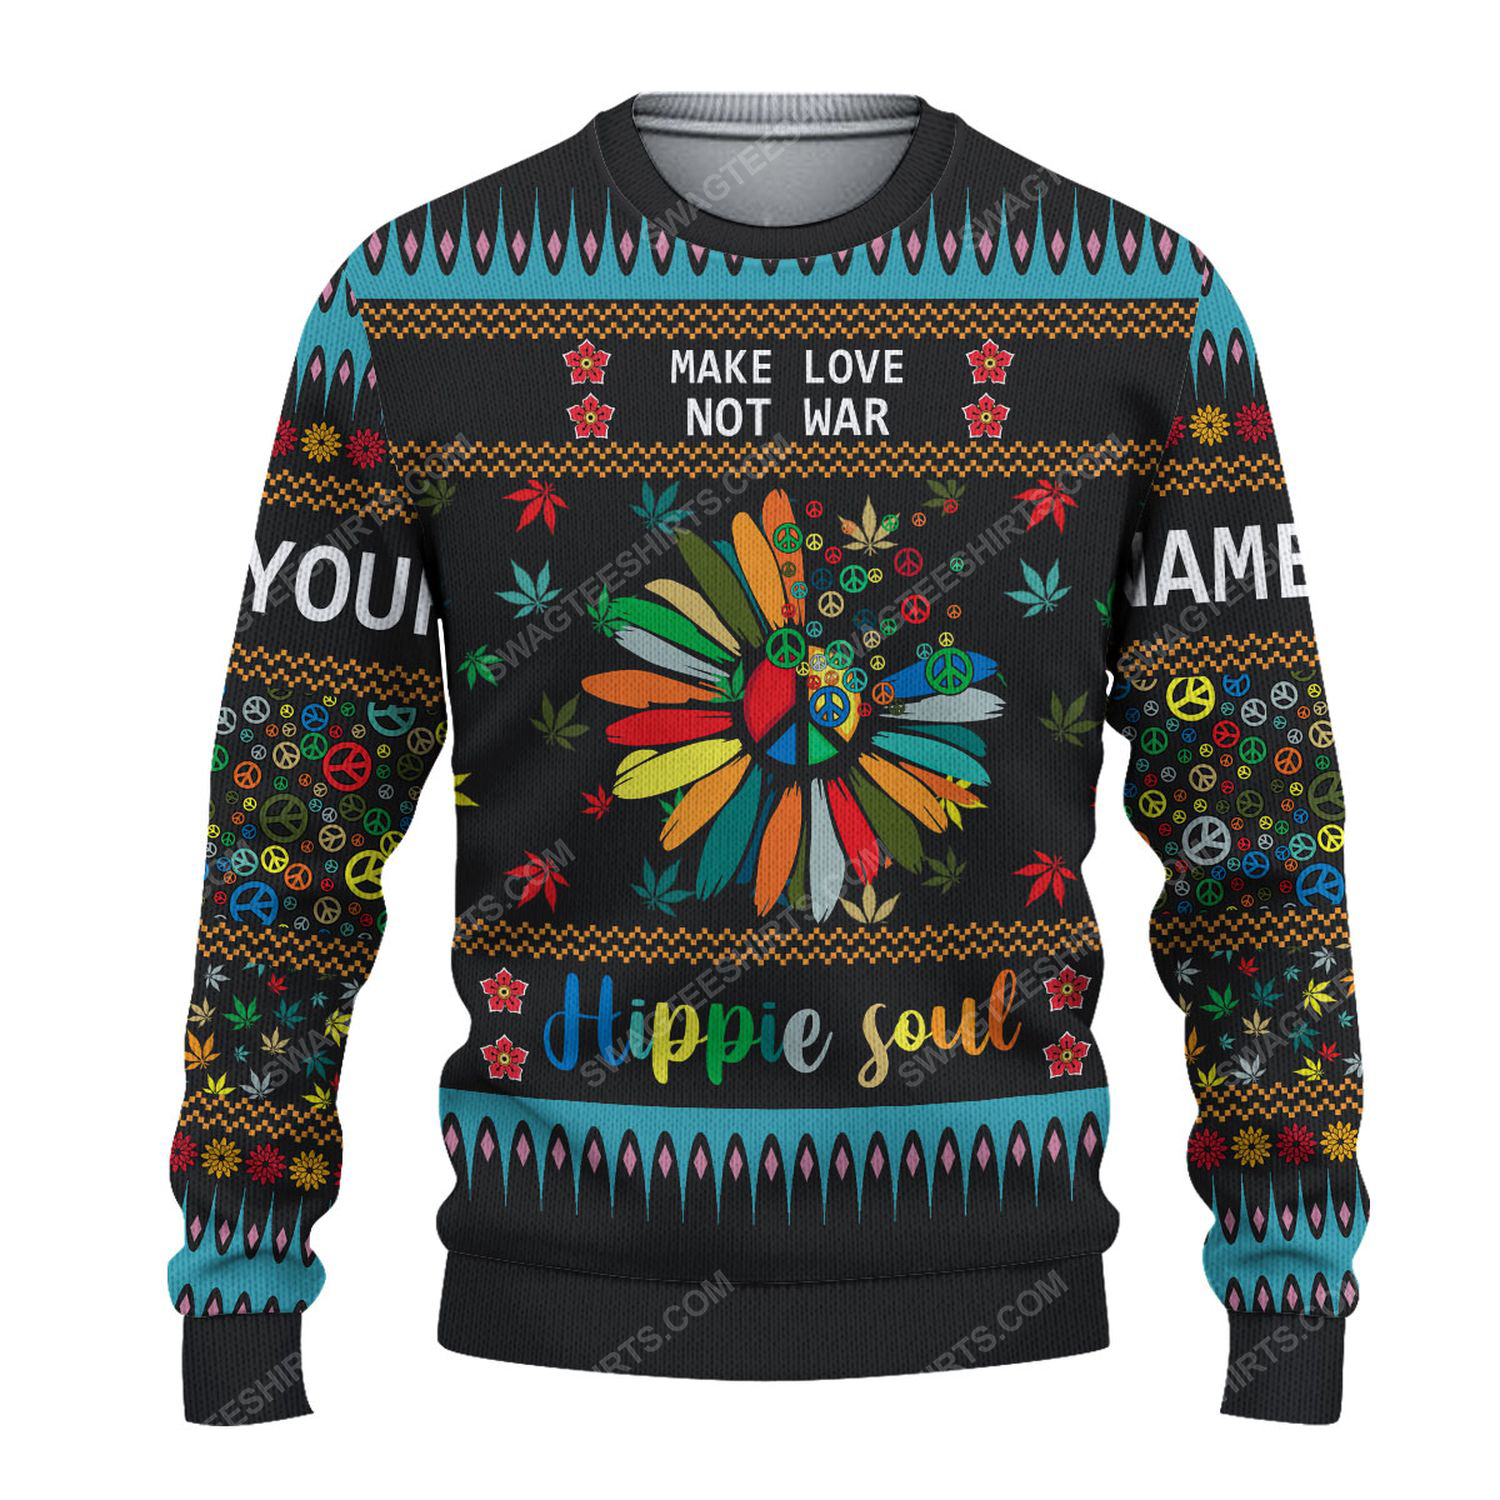 Hippie soul make love not war ugly christmas sweater 1 - Copy (3)